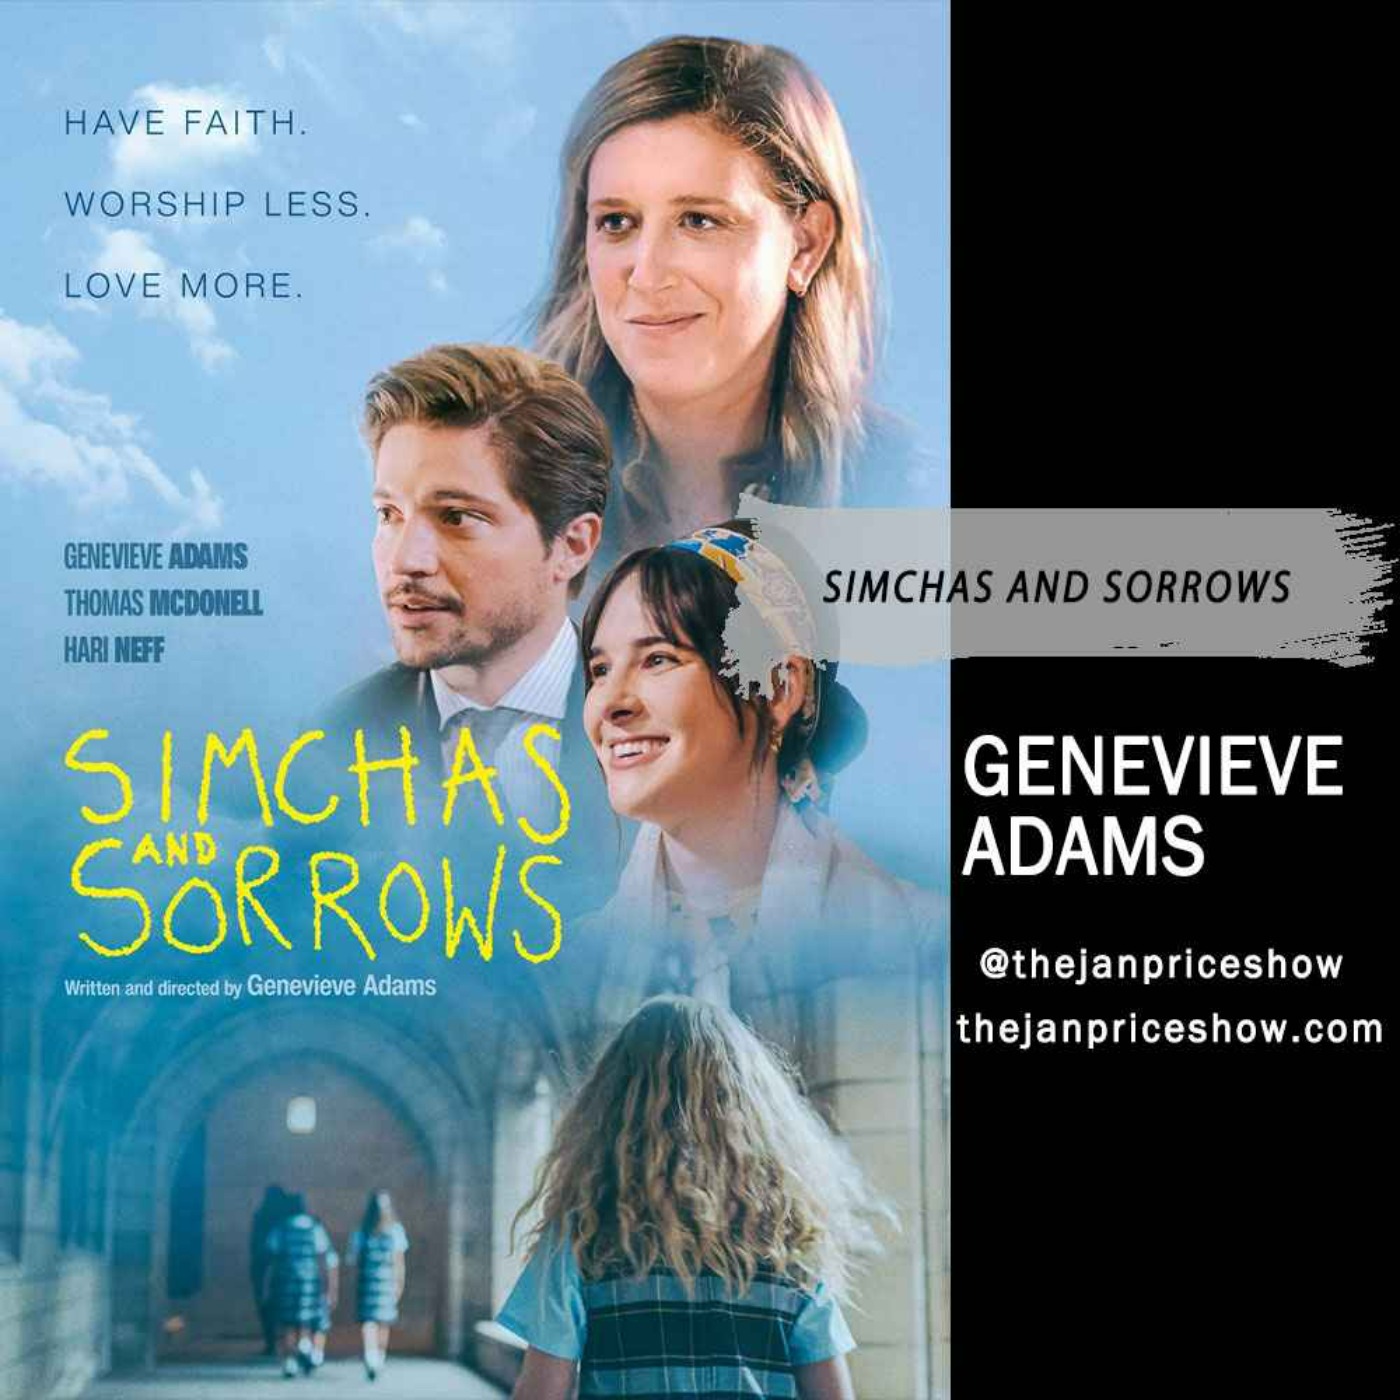 Genevieve Adams - Simchas and Sorrows